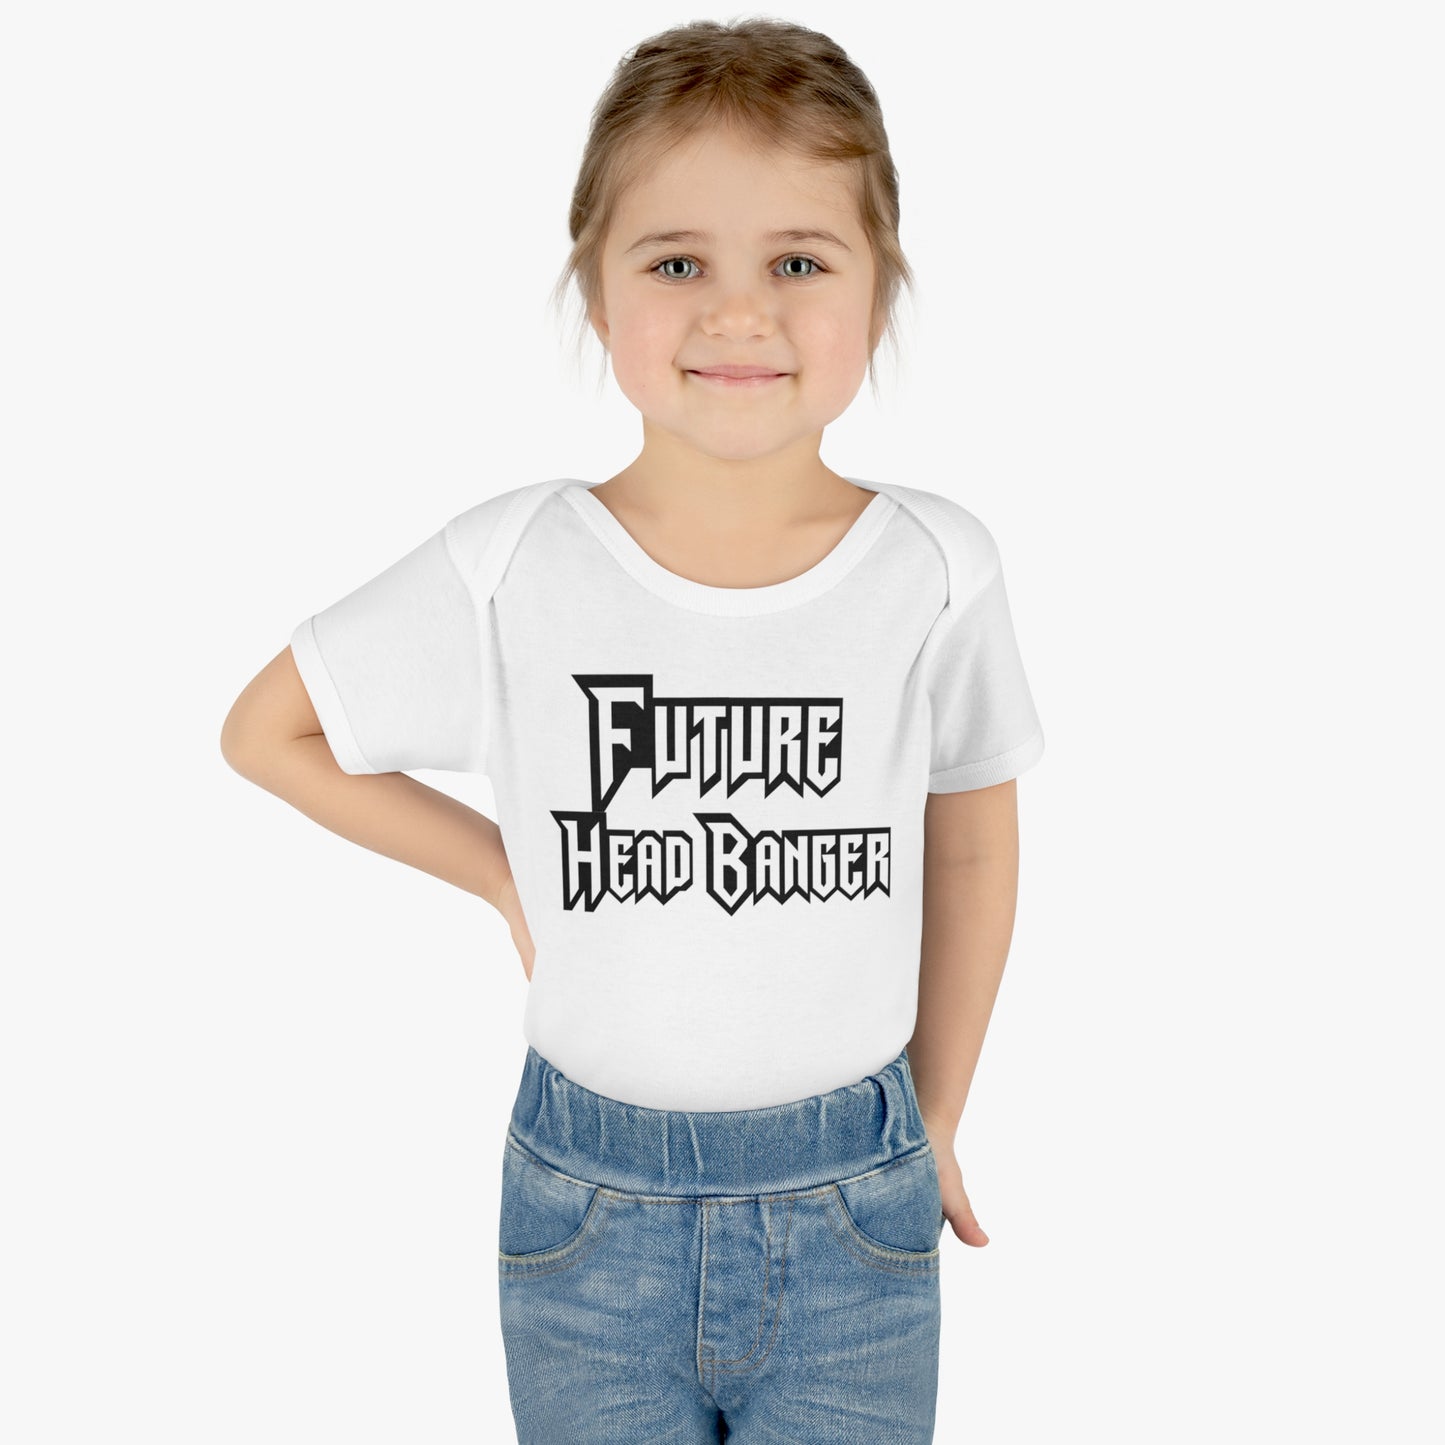 Future Head Banger Tee, Infant One Piece, Toddler Bodysuit, Rock and Roll T-Shirt for Baby, Heavy Metal T-Shirt, Musician T-Shirt